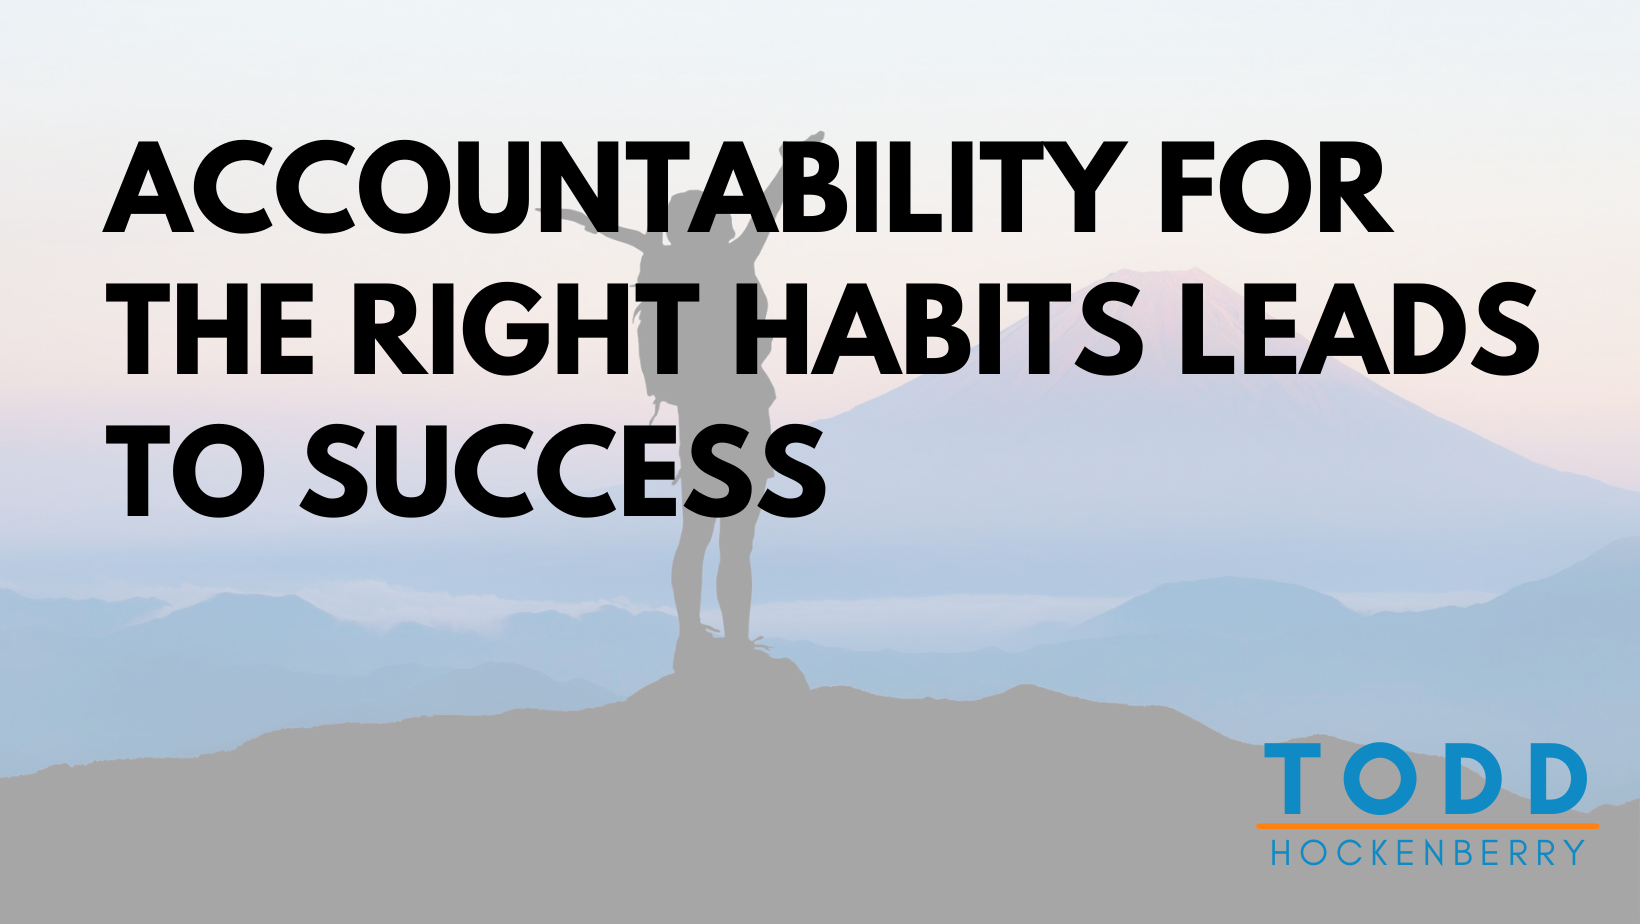 Accountability for the right habits leads to success